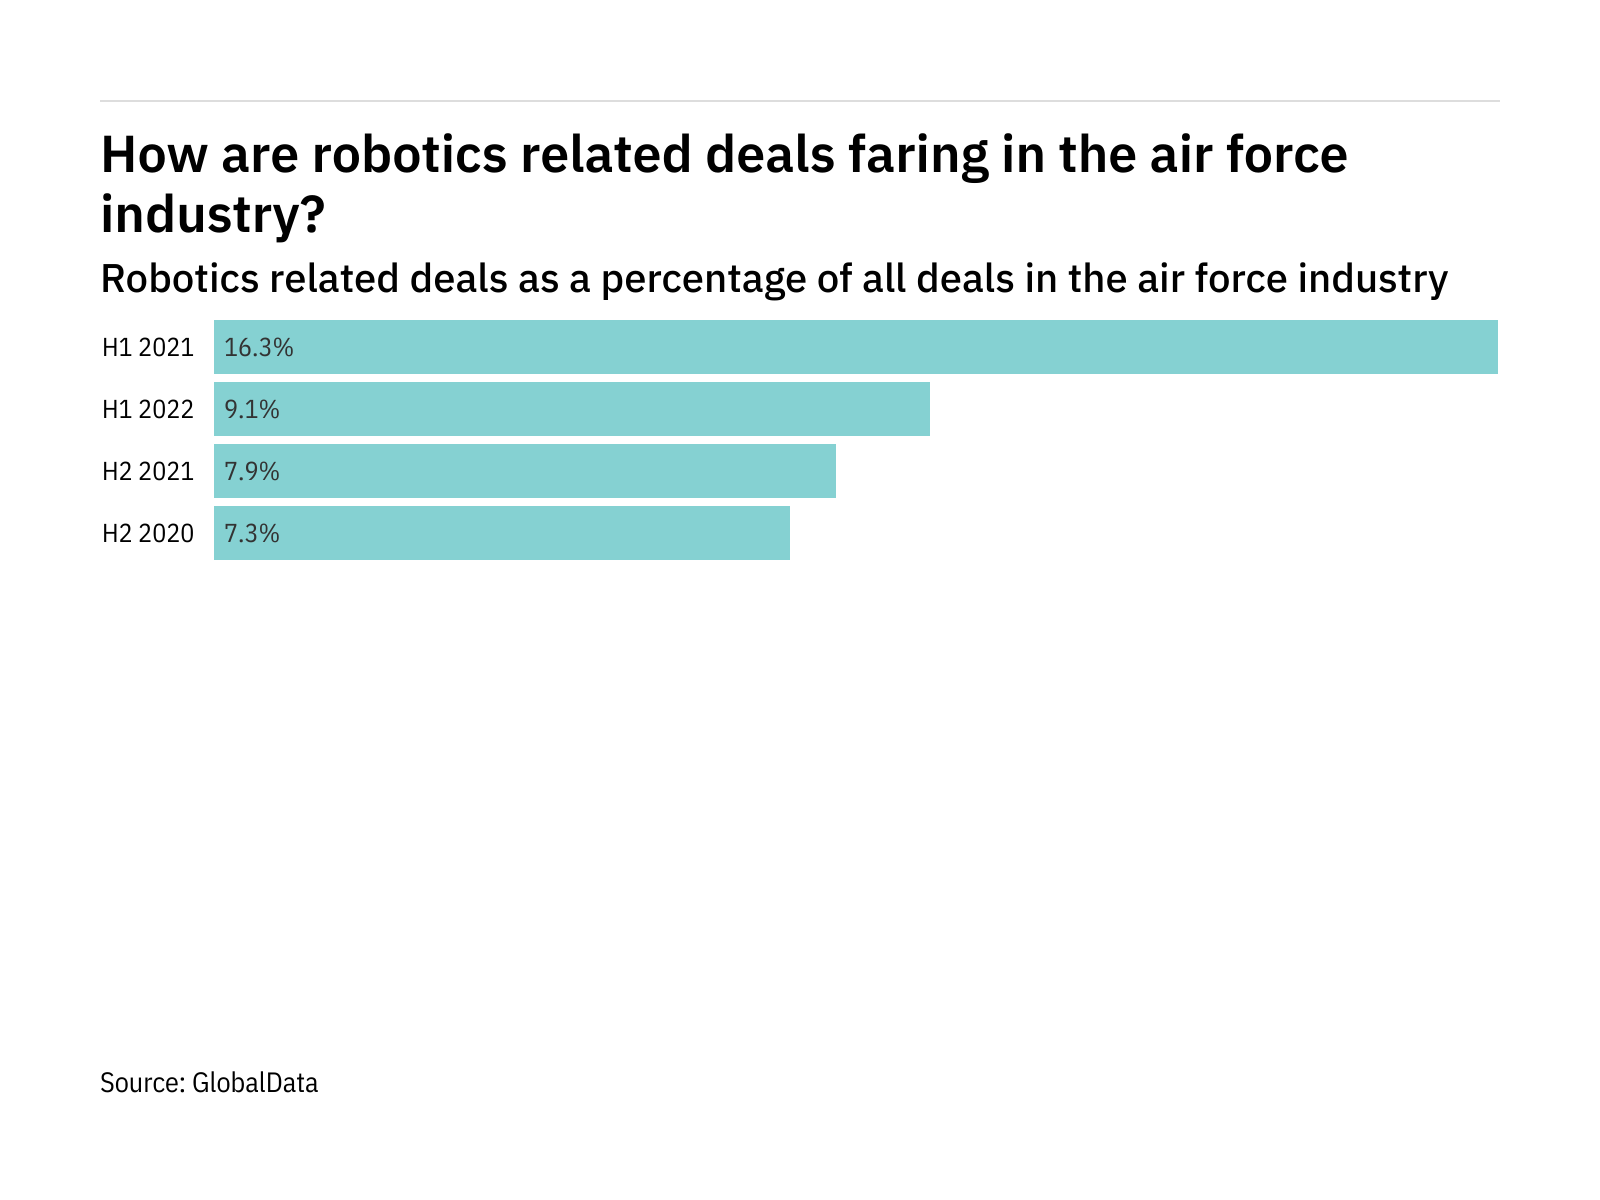 Deals relating to robotics decreased significantly in the air force industry in H1 2022